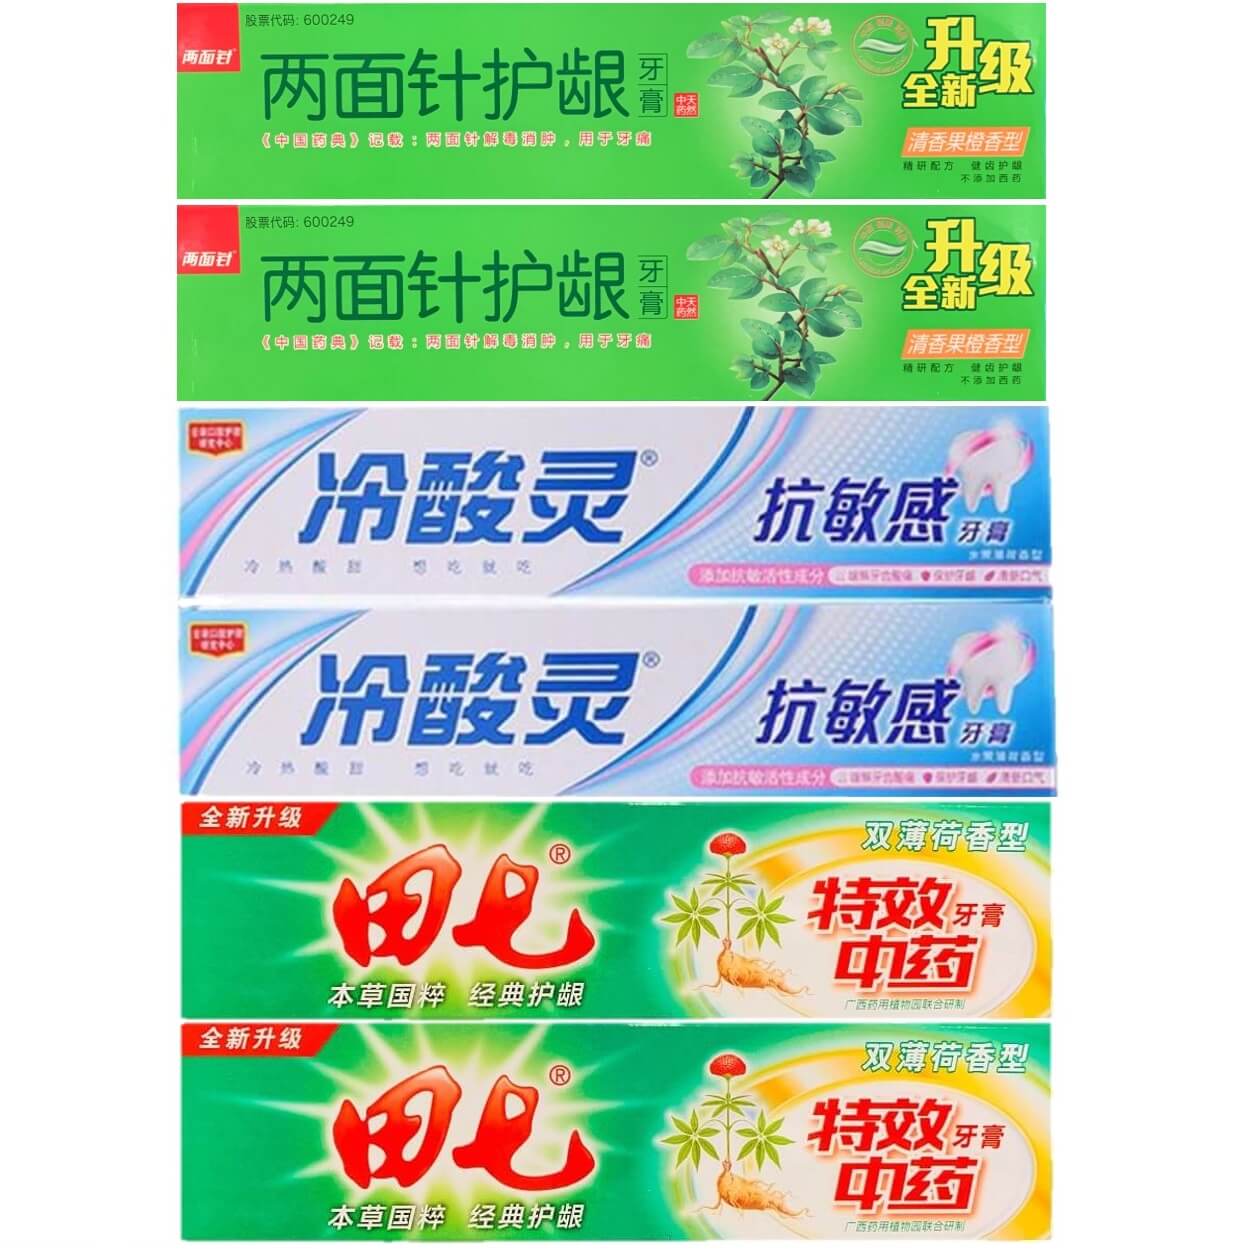 Herbal Toothpaste Variety, Liang Mian Zhen, Len Shuan Ling, Notoginseng - 6 Boxes - Buy at New Green Nutrition